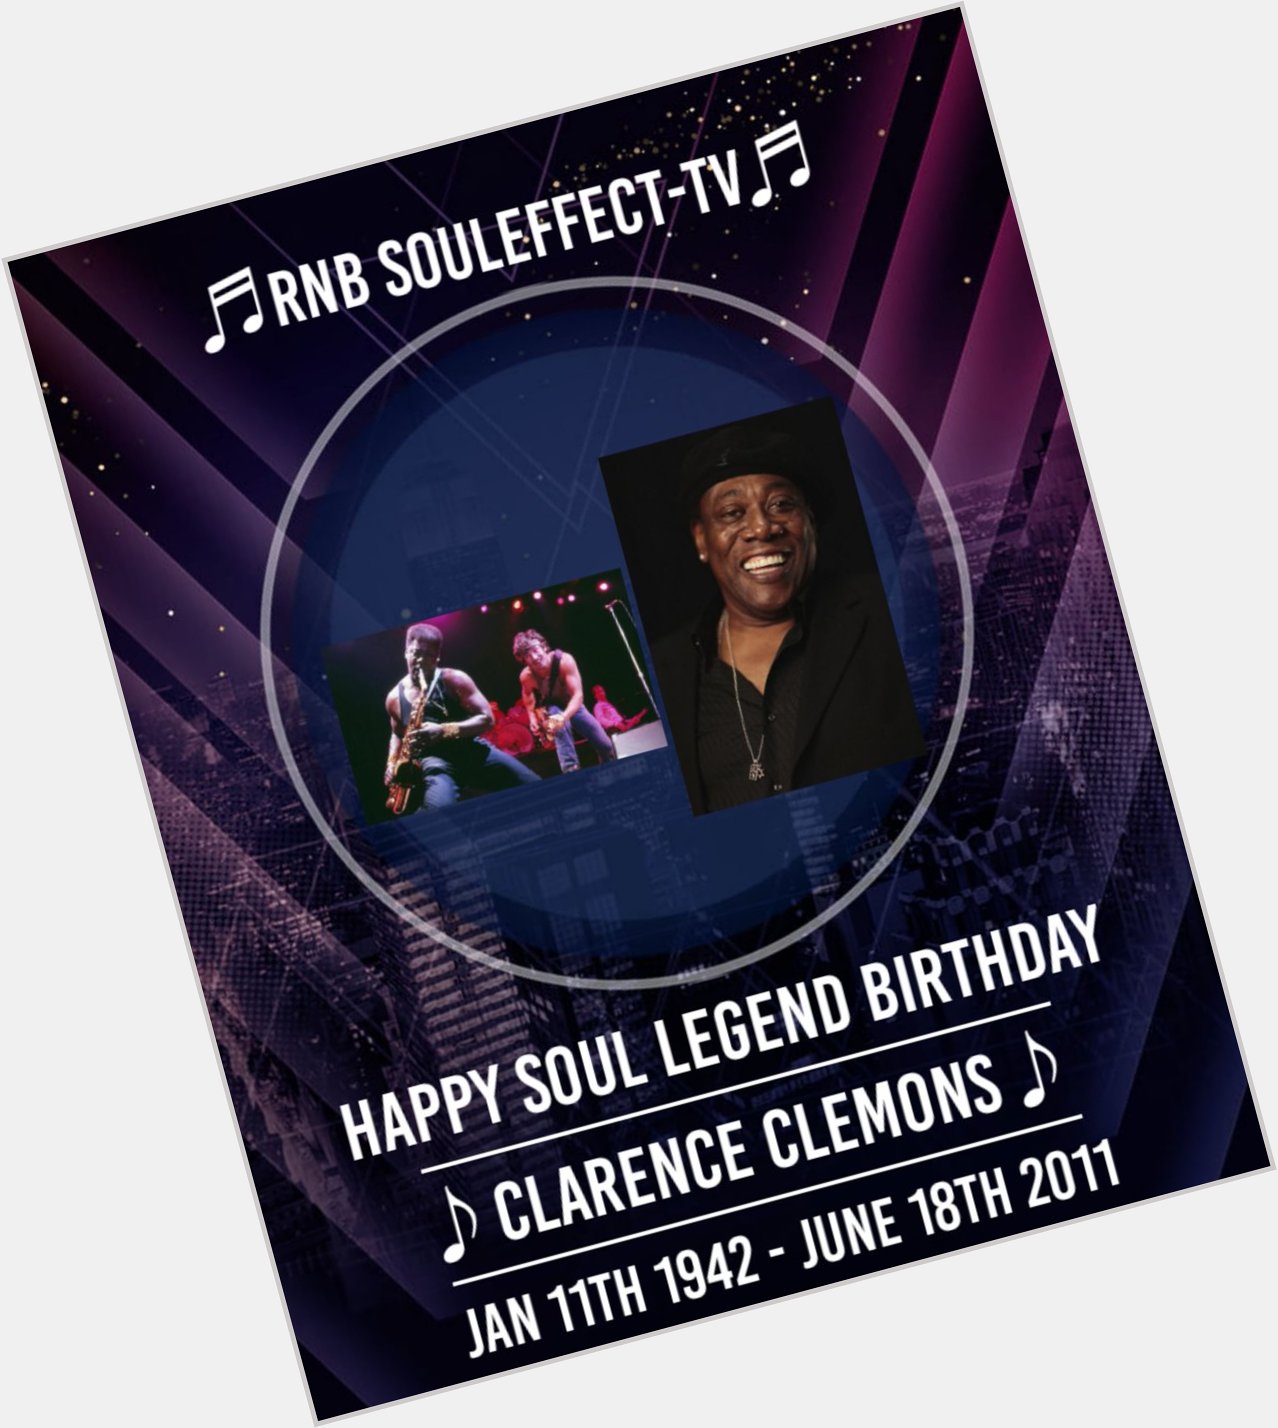 Happy Soul Legend Birthday Clarence Clemons . 